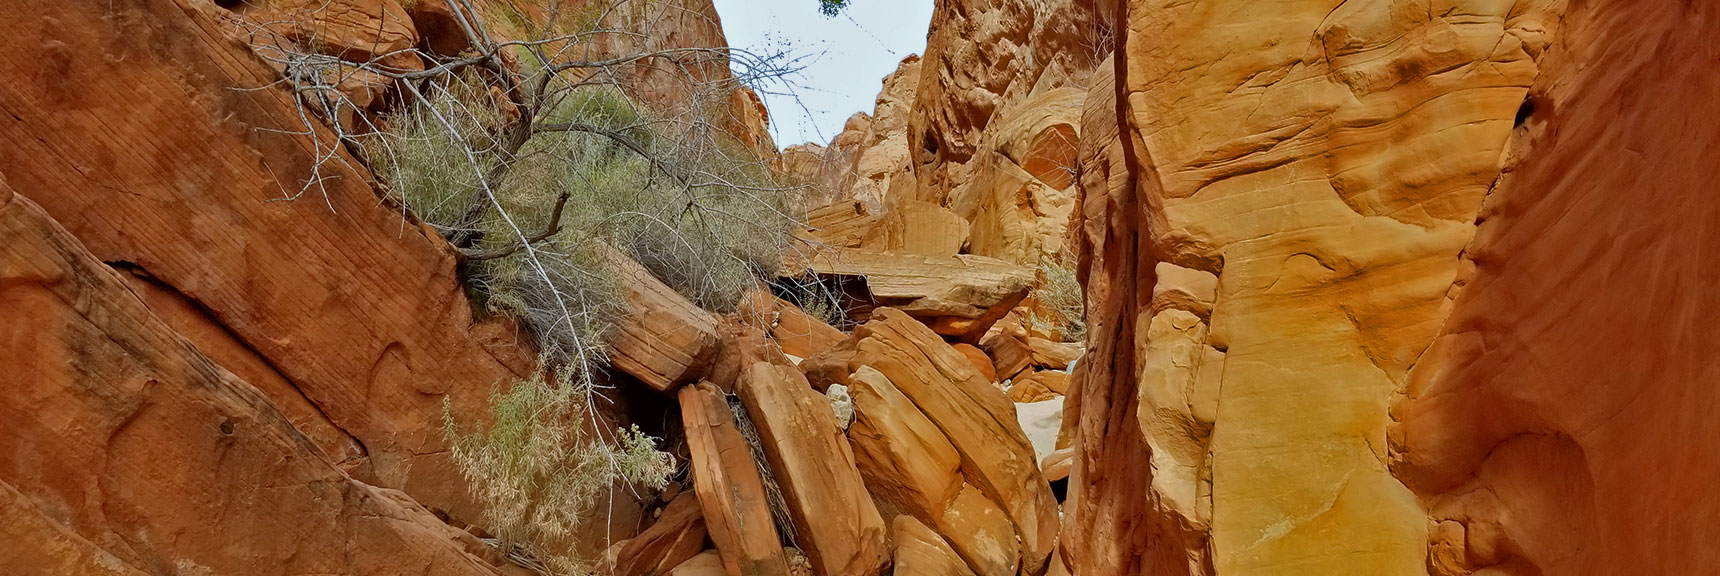 Obstacles to Cross in Fire Canyon in Valley of Fire State Park, Nevada